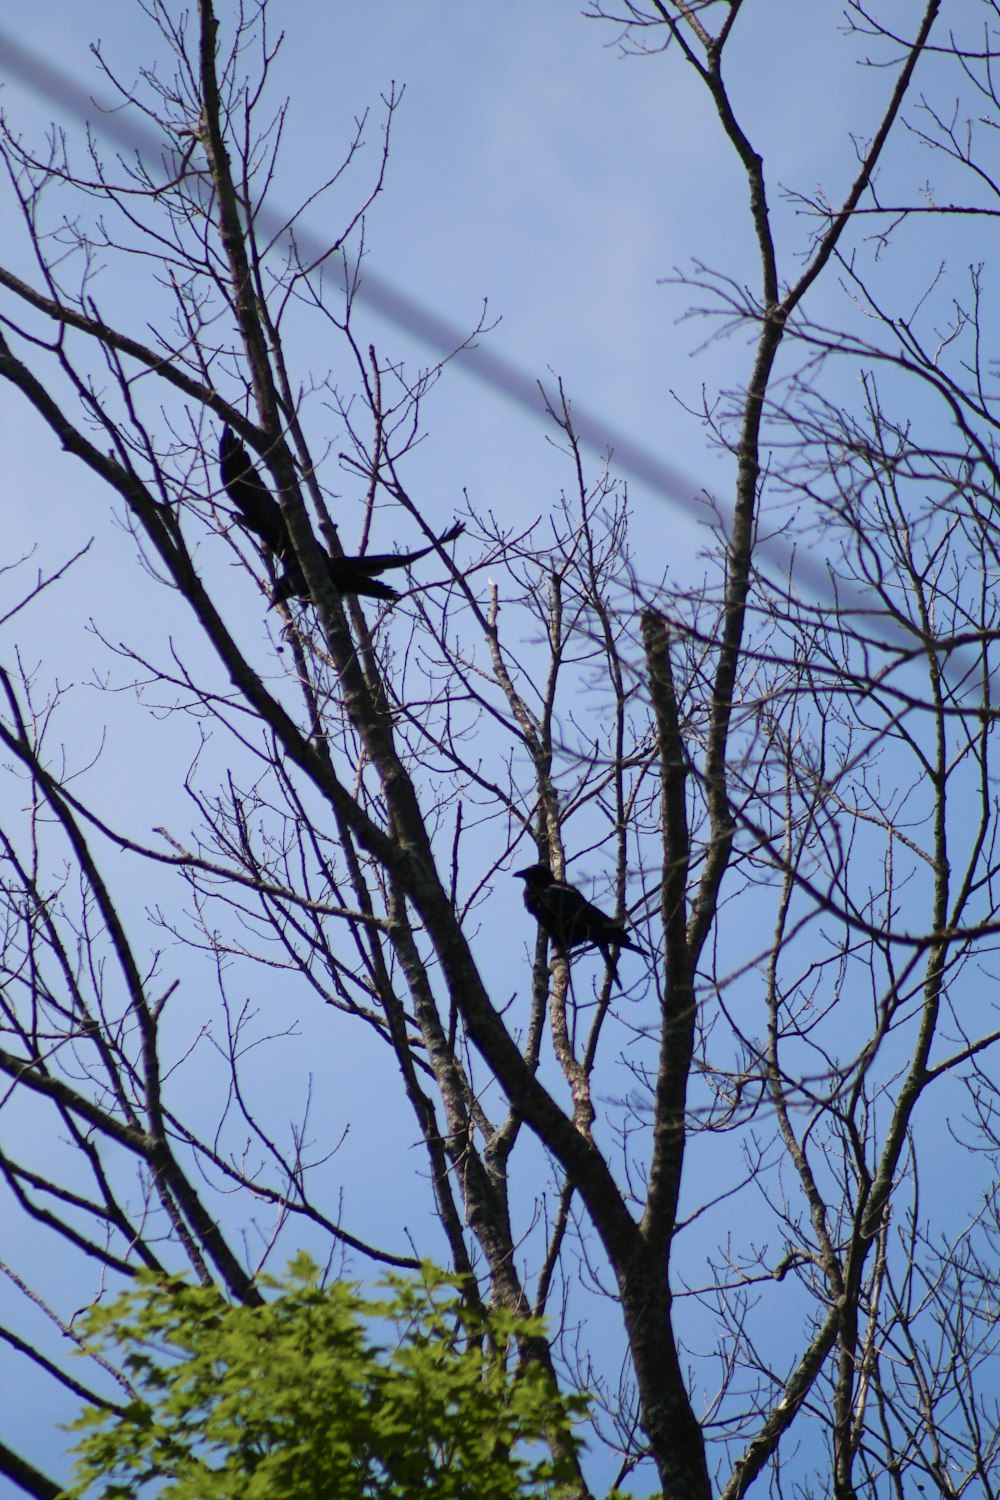 two black birds sitting in a bare tree